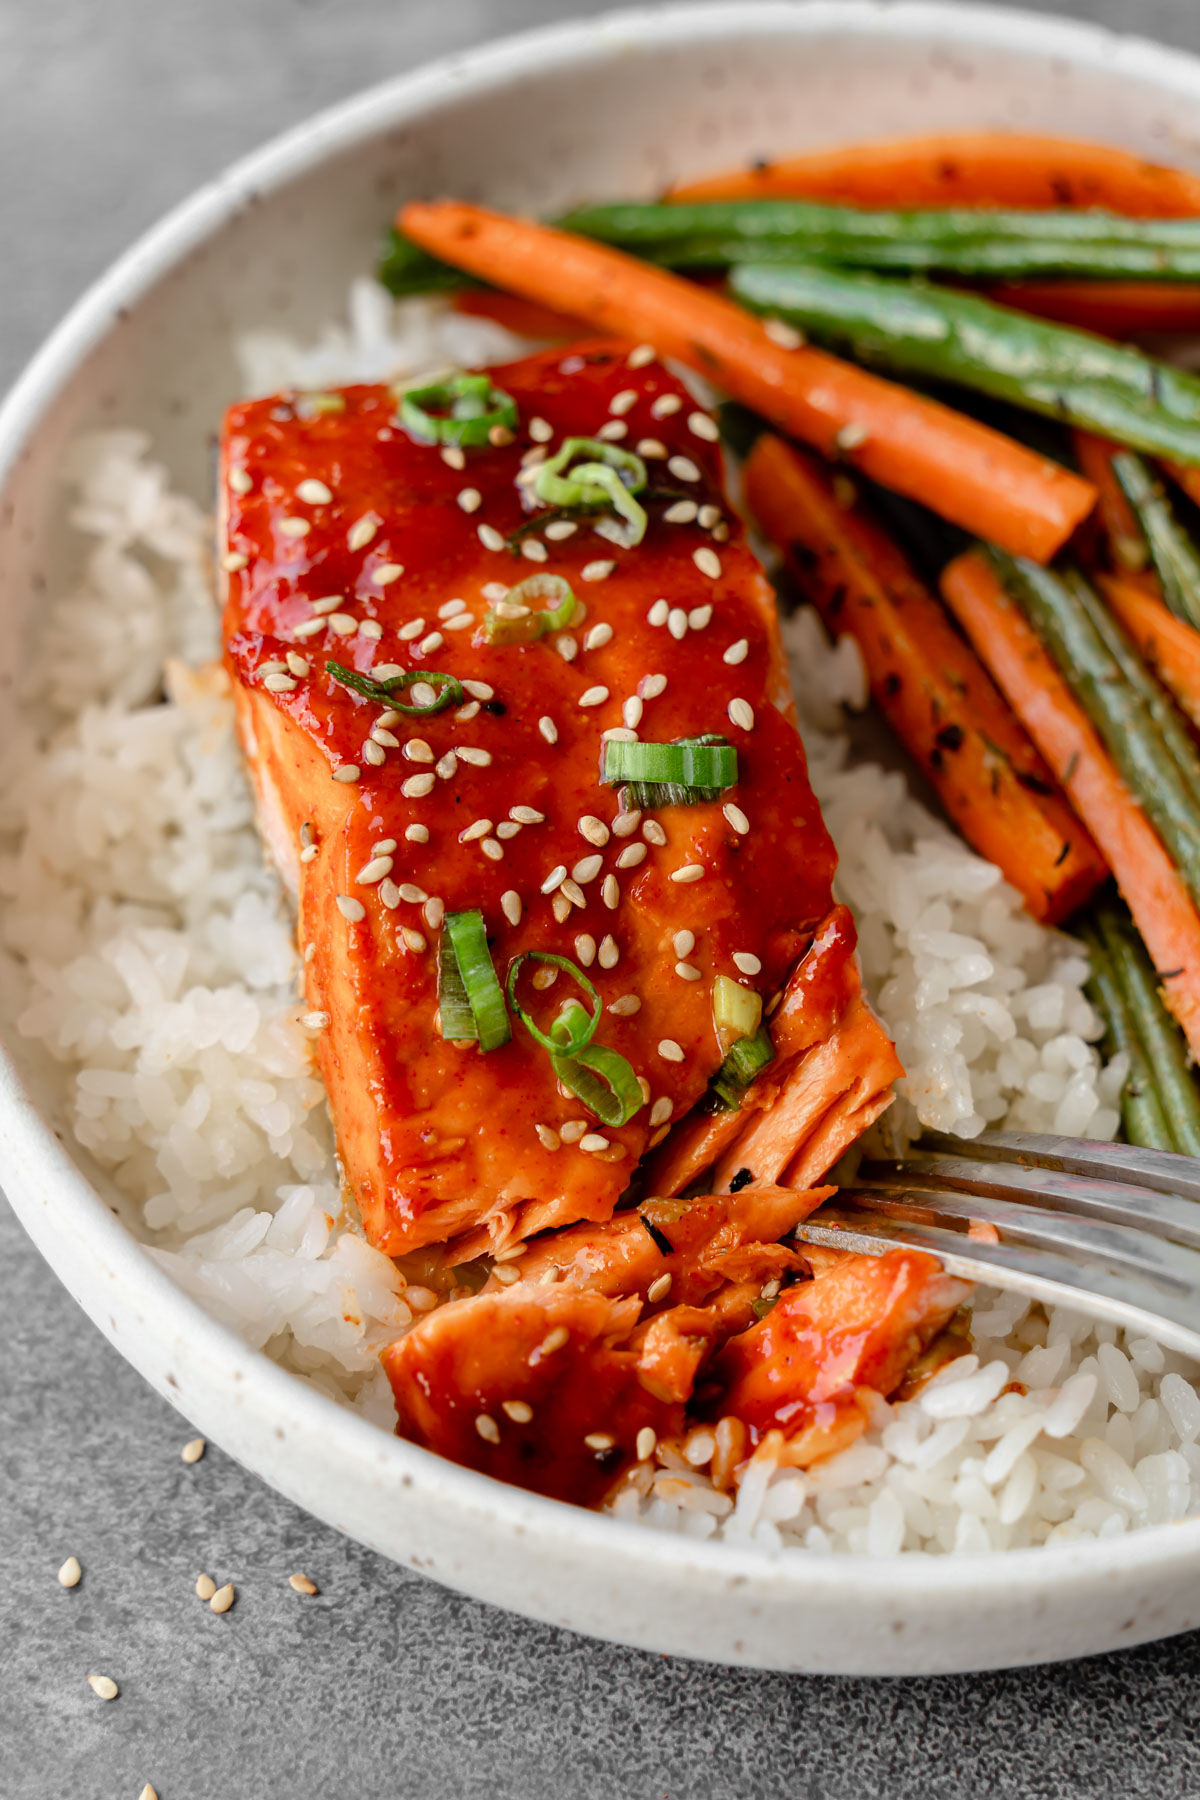 Gochujang glazed salmon in a bowl with rice, roasted vegetables, and a fork.